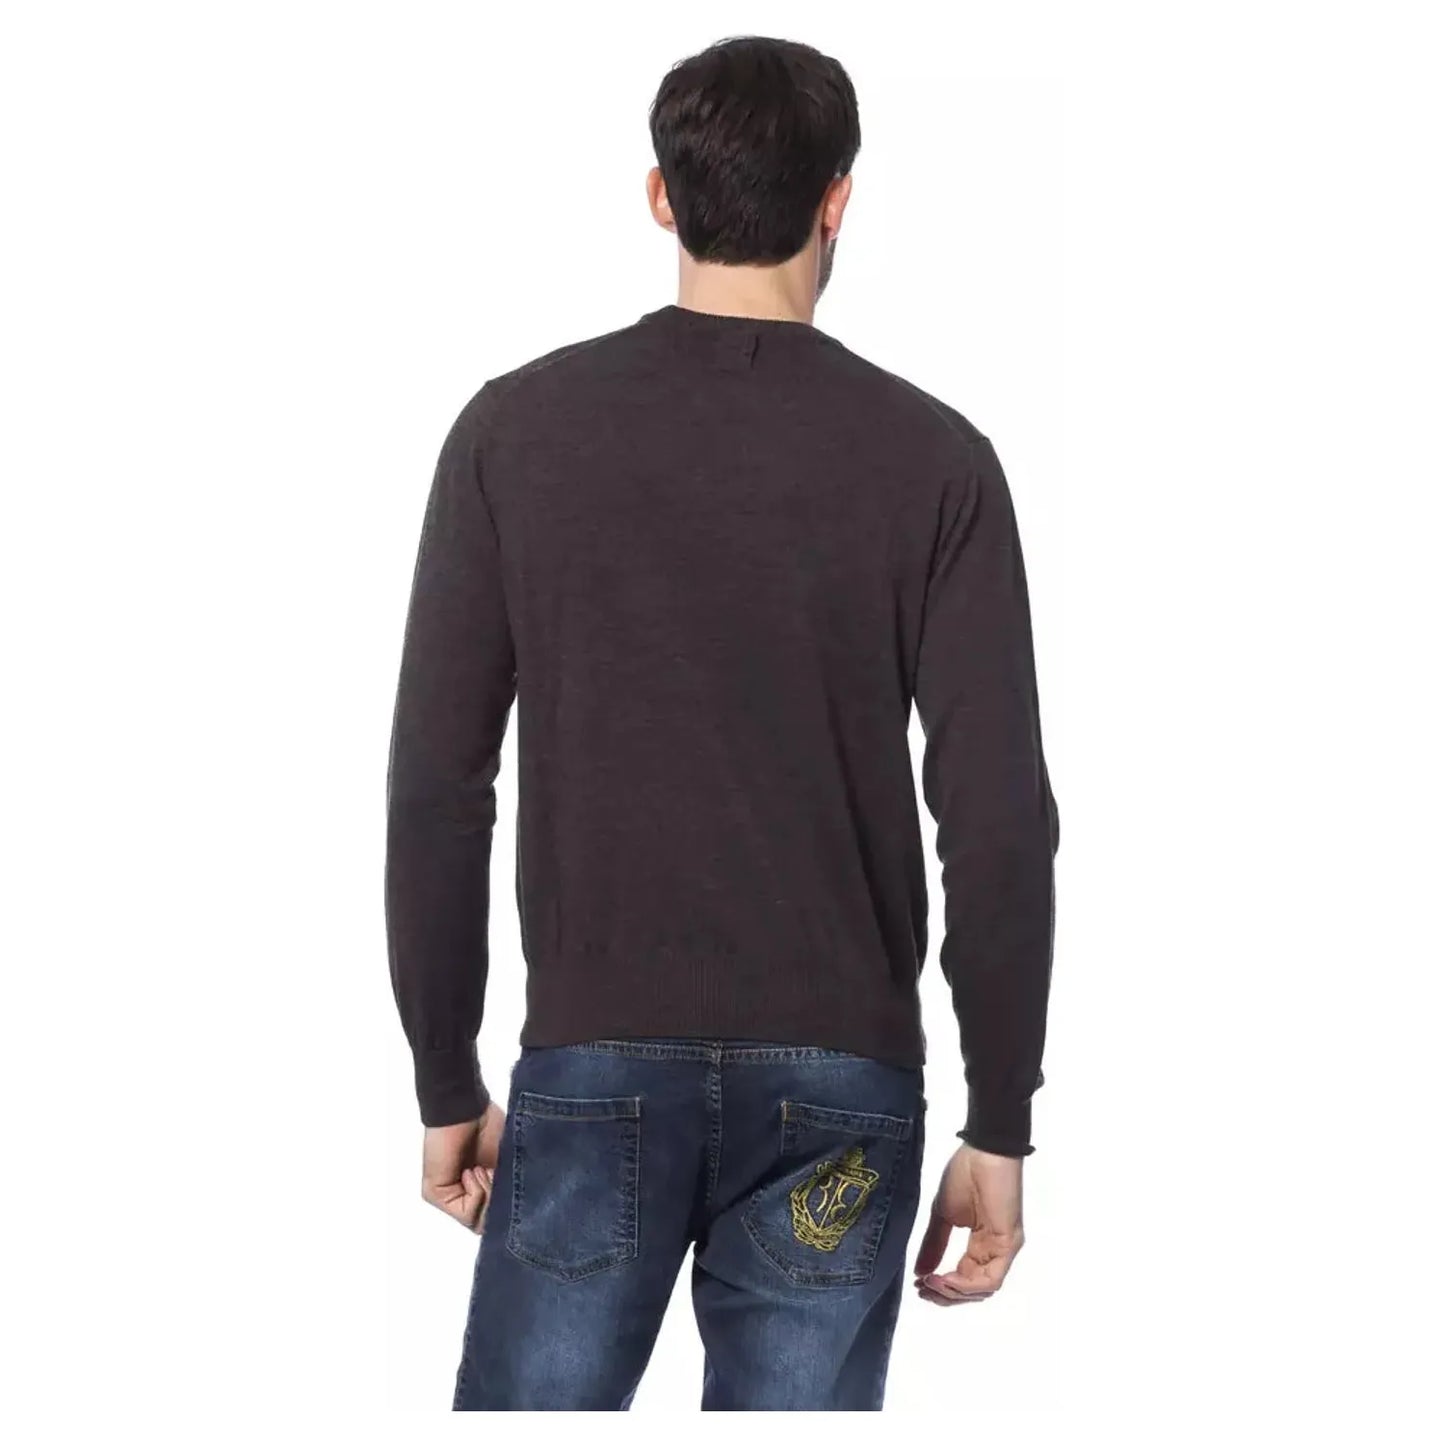 Billionaire Italian Couture Elegant Embroidered Merino Wool Sweater marr-brown-sweater-2 stock_product_image_10482_94474760-17-3e12cfee-e0a.webp